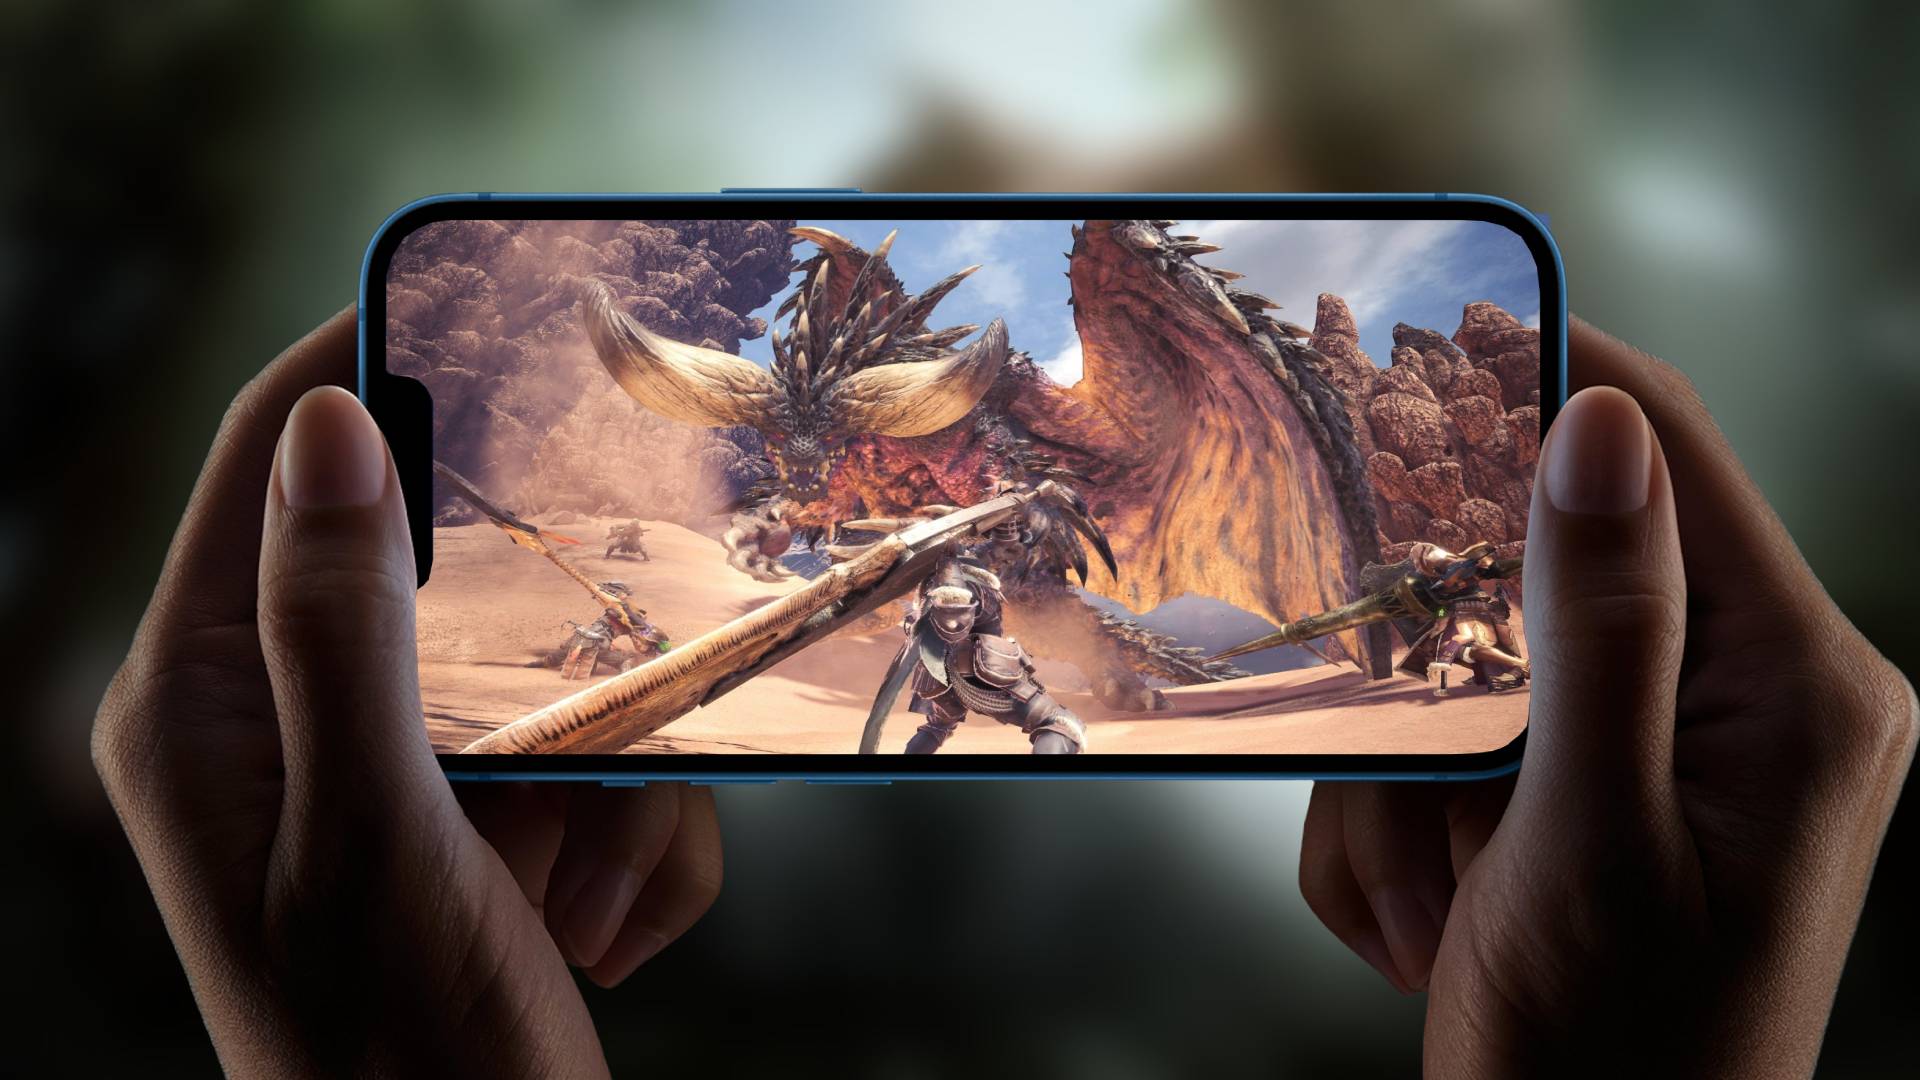 Top 10 Mobile Games for Android & iOS in 2023 (Online / Offline